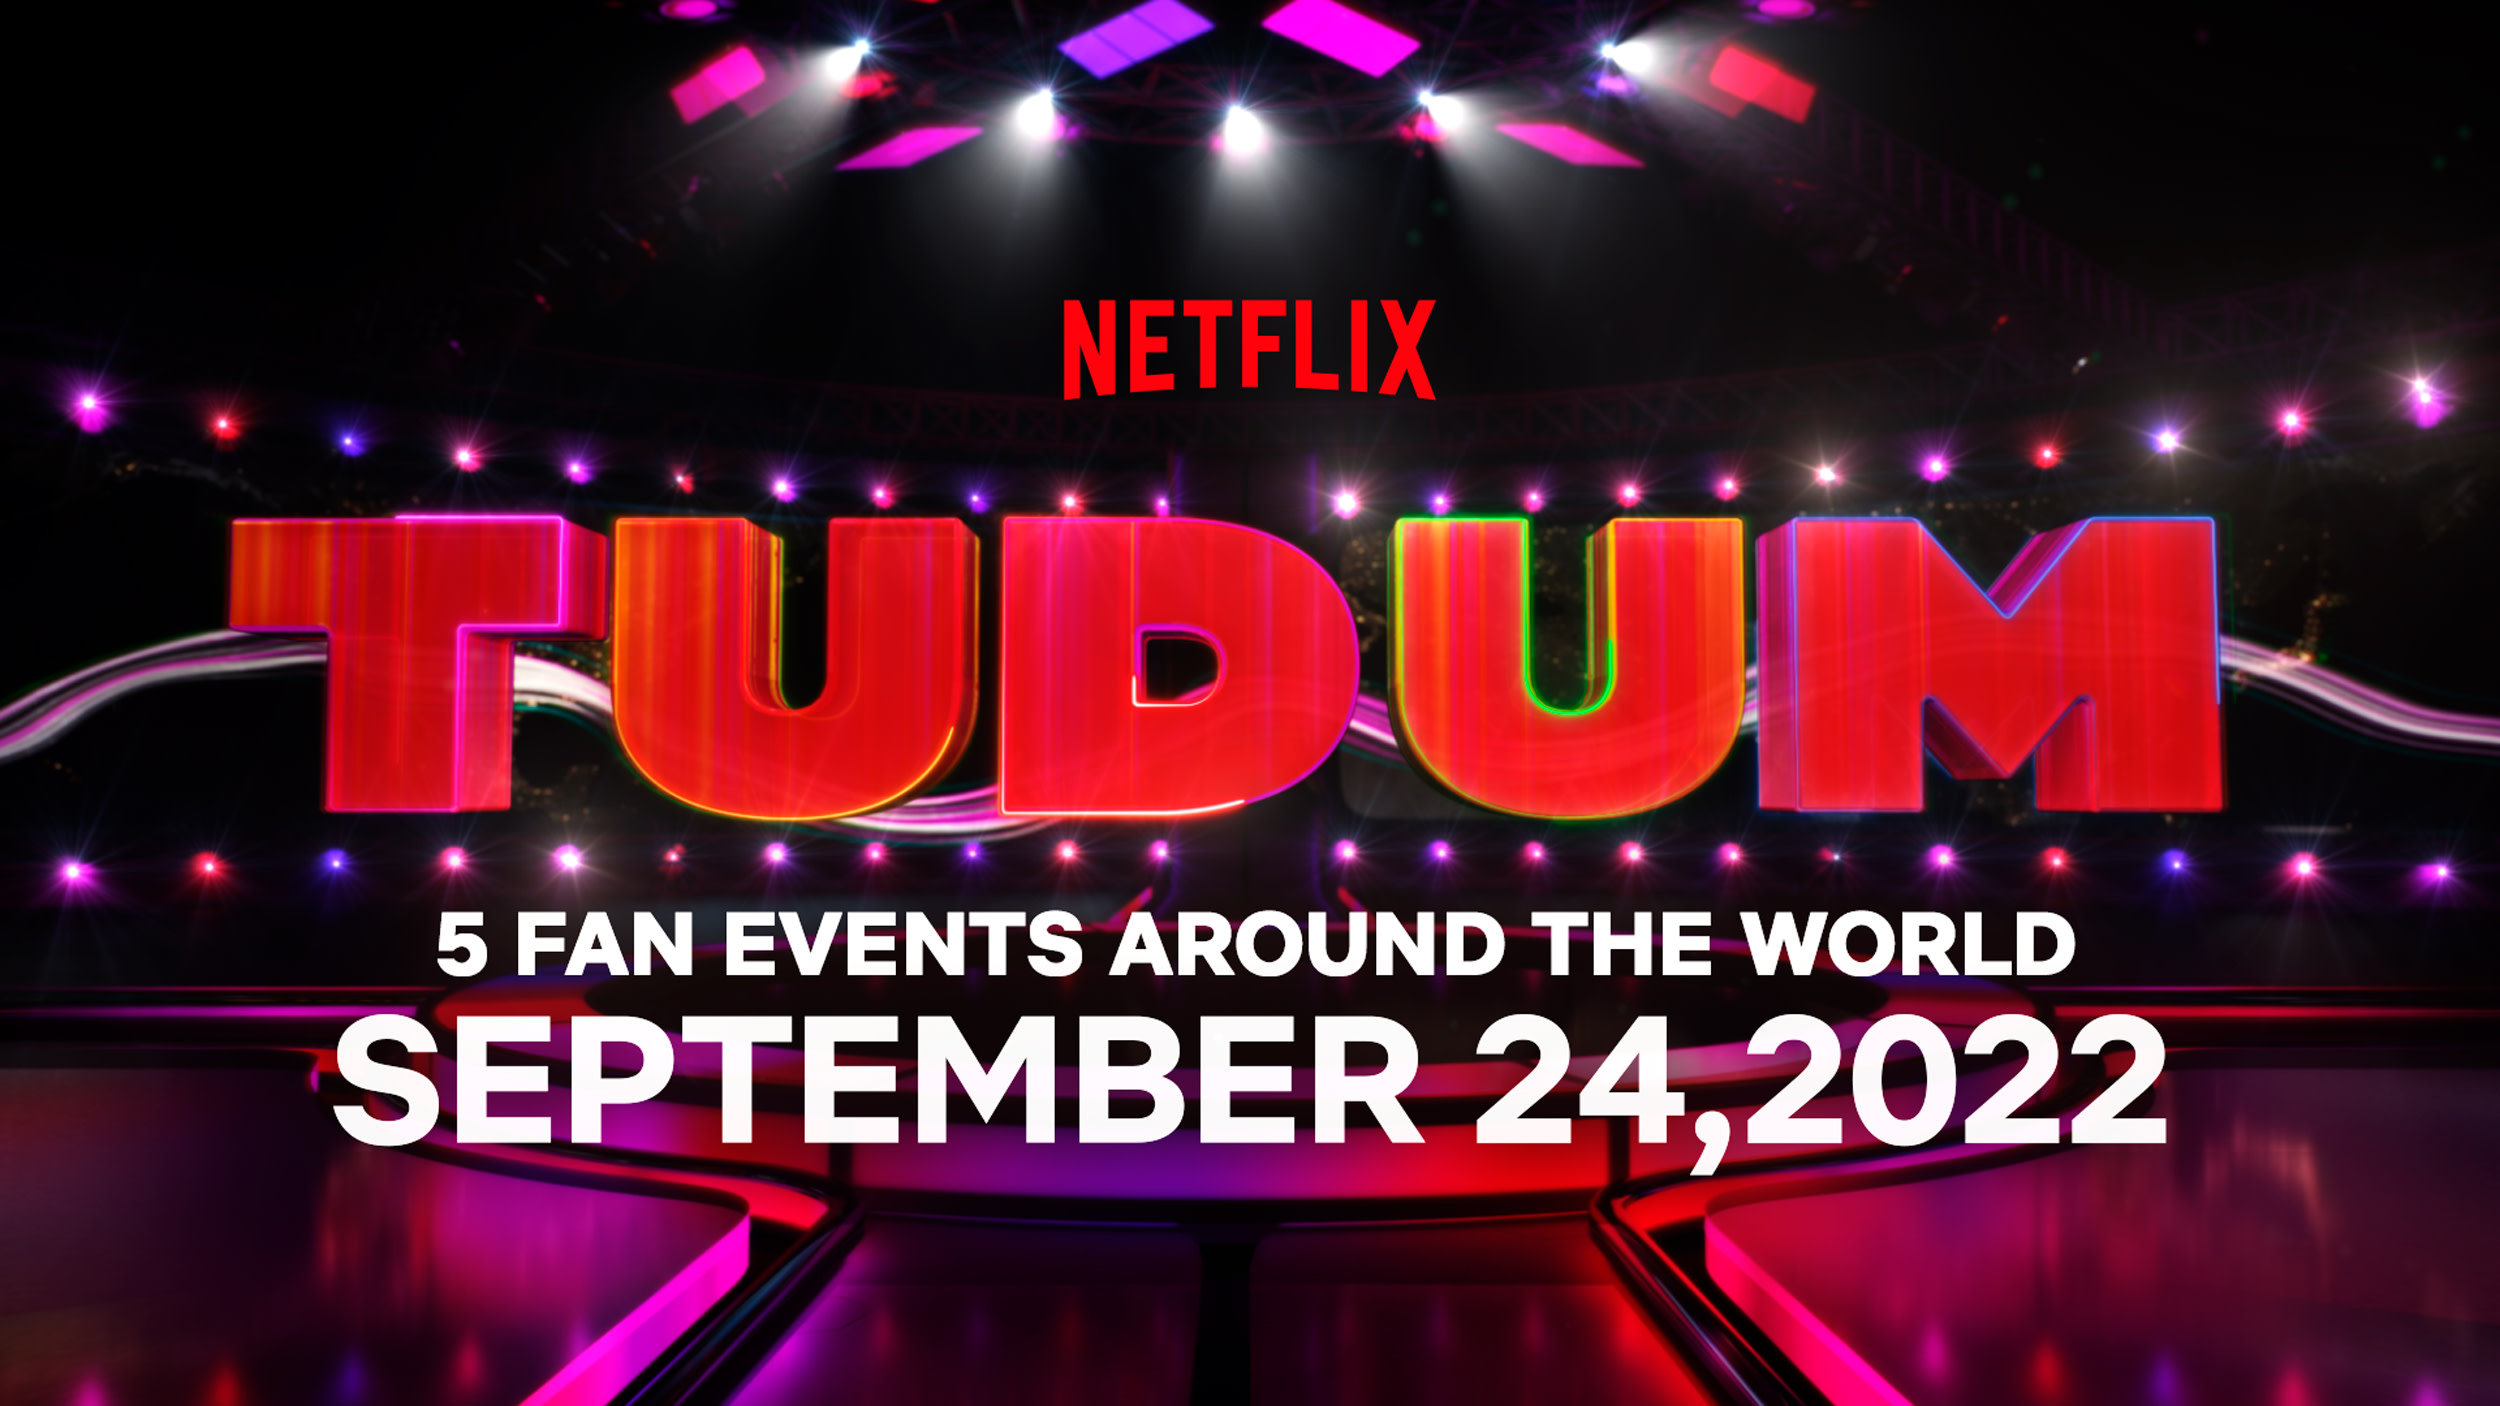 Save the Date! Tudum: A Netflix Global Fan Event Is Back This September 